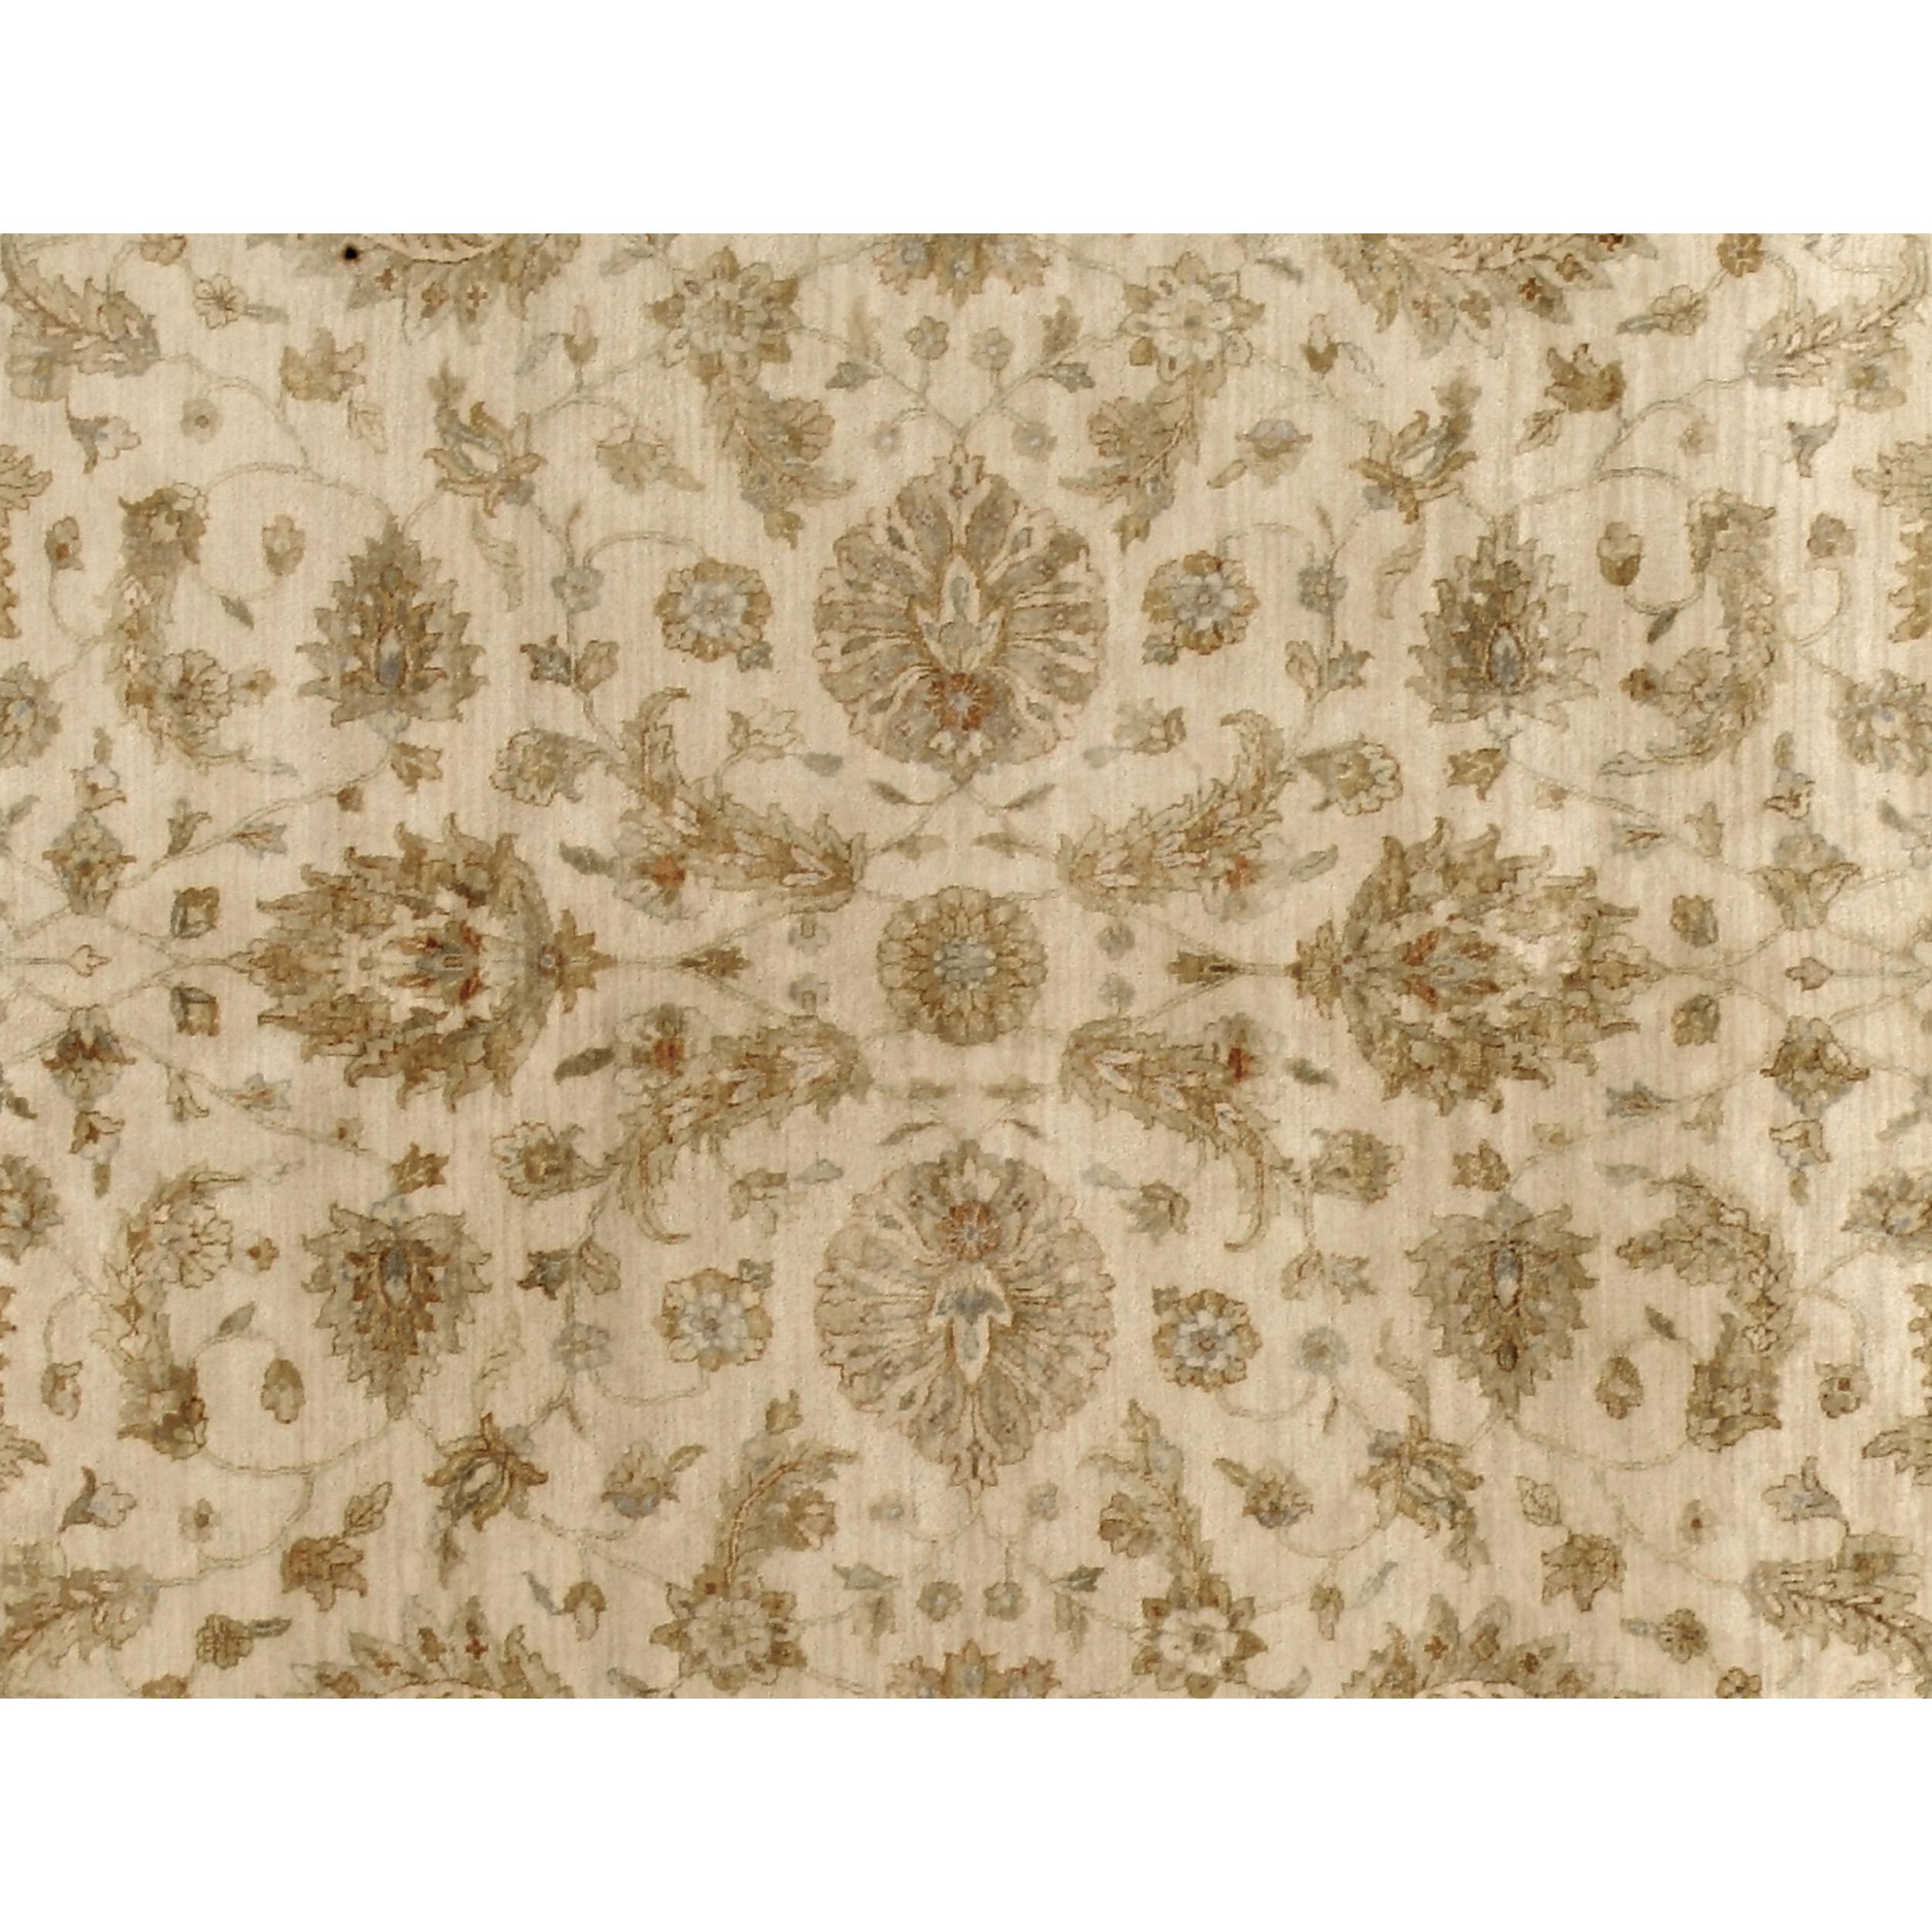 Agra Luxury Traditional Hand-Knotted Cream 12X24 Rug For Sale